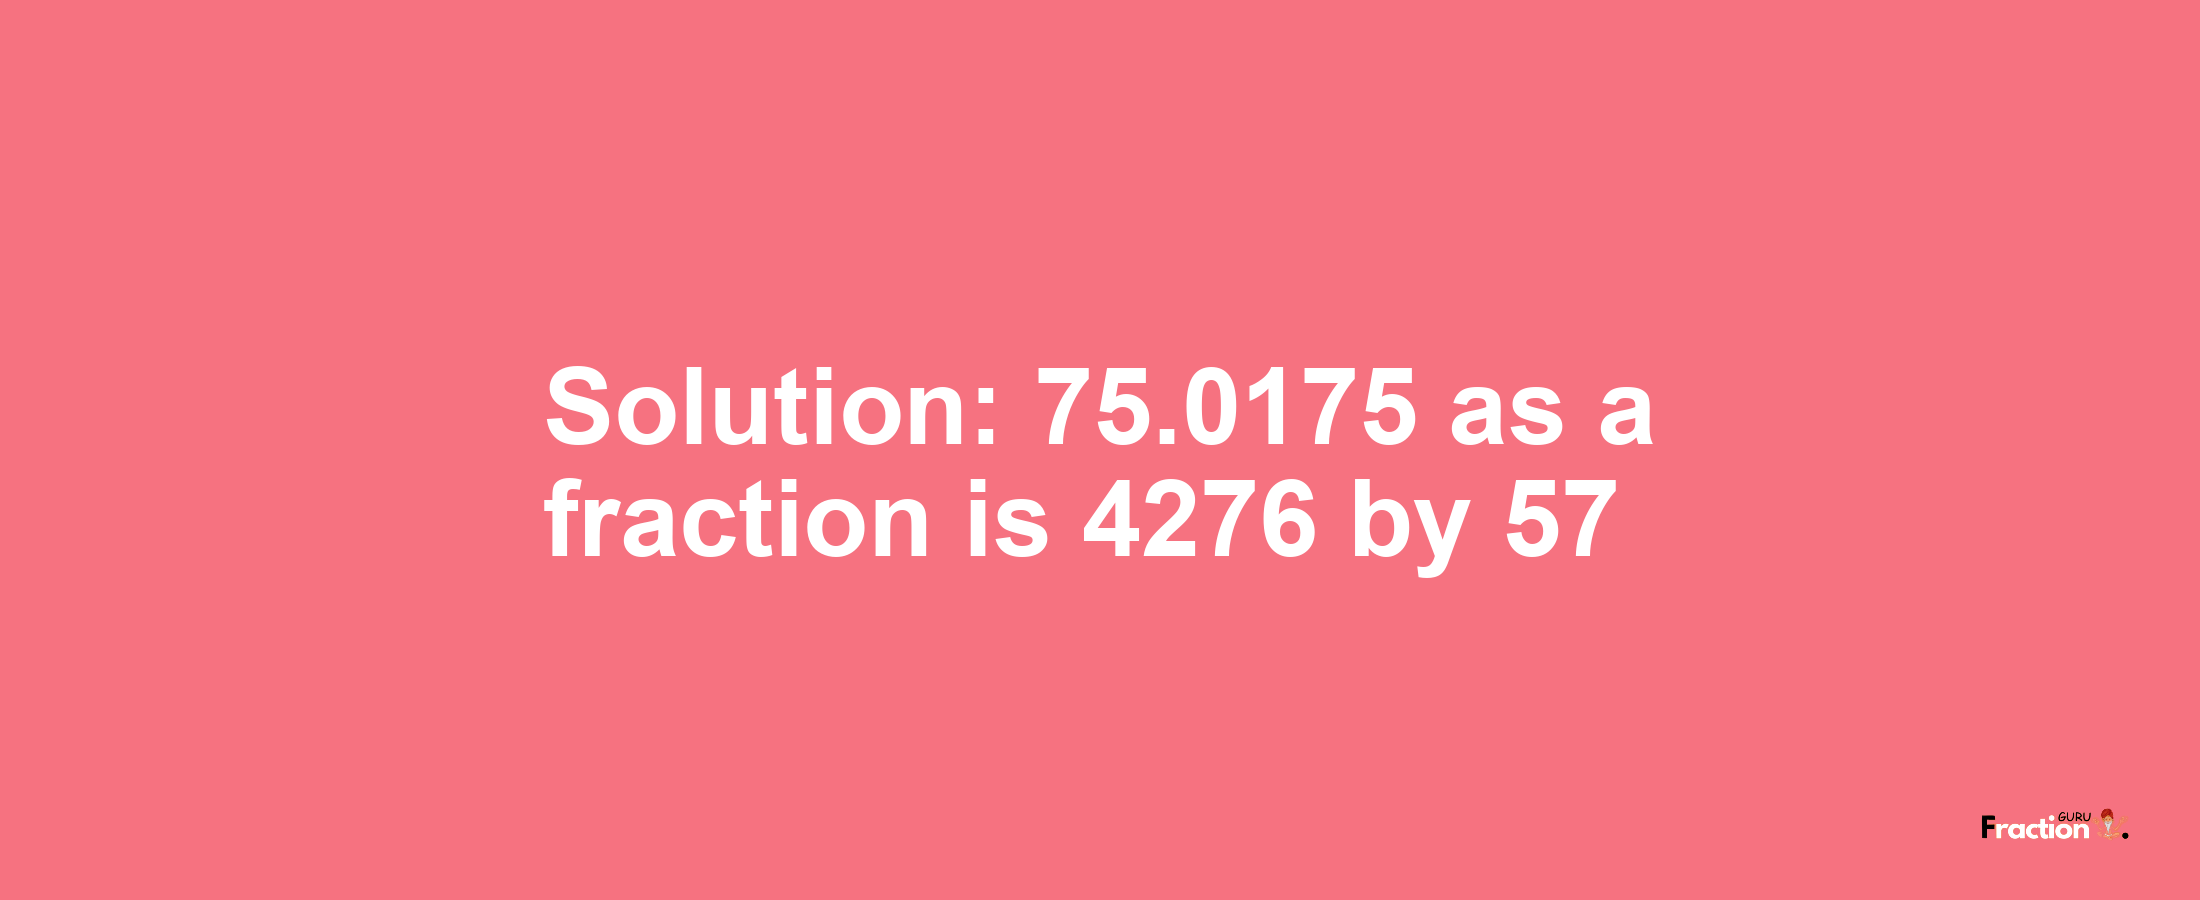 Solution:75.0175 as a fraction is 4276/57